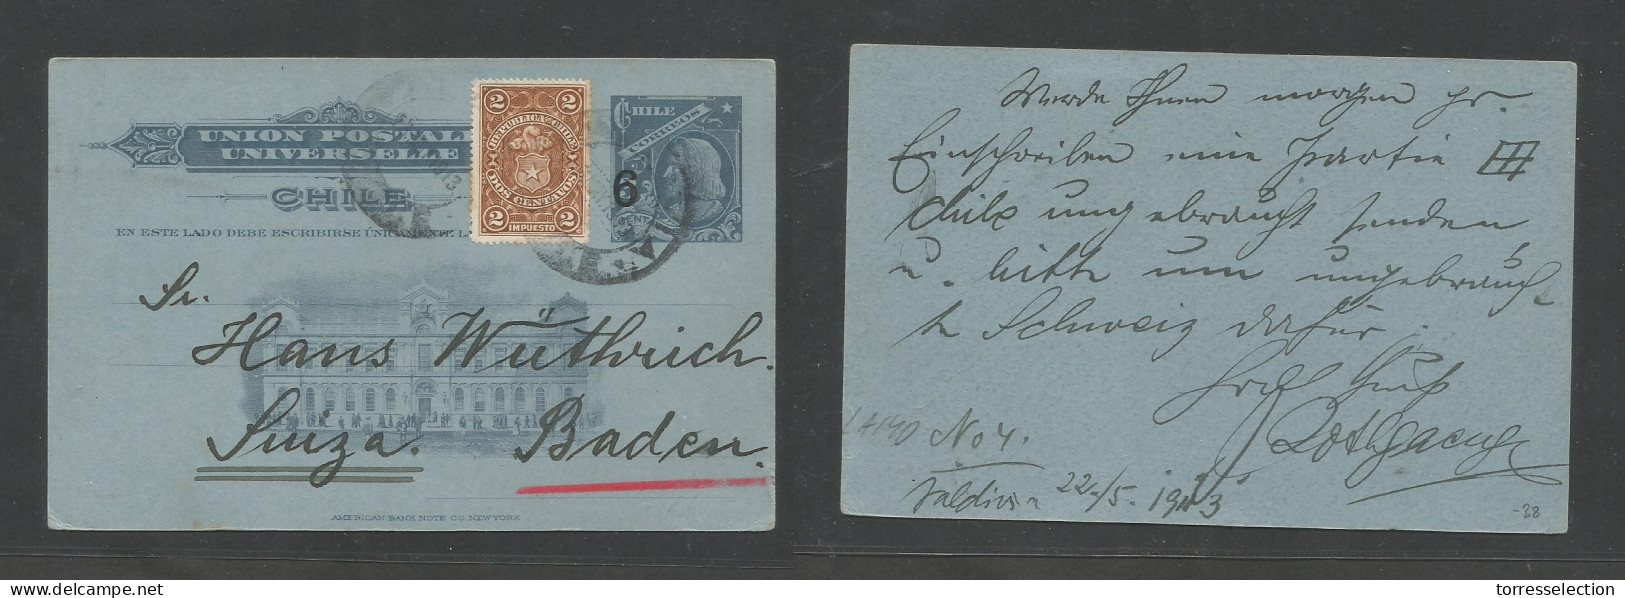 CHILE - Stationery. 1913 (22 May) 3rd Provisional Period. Valdivia - Swizerland, Baden 6c /3c Grey Bluish Illustrated St - Cile